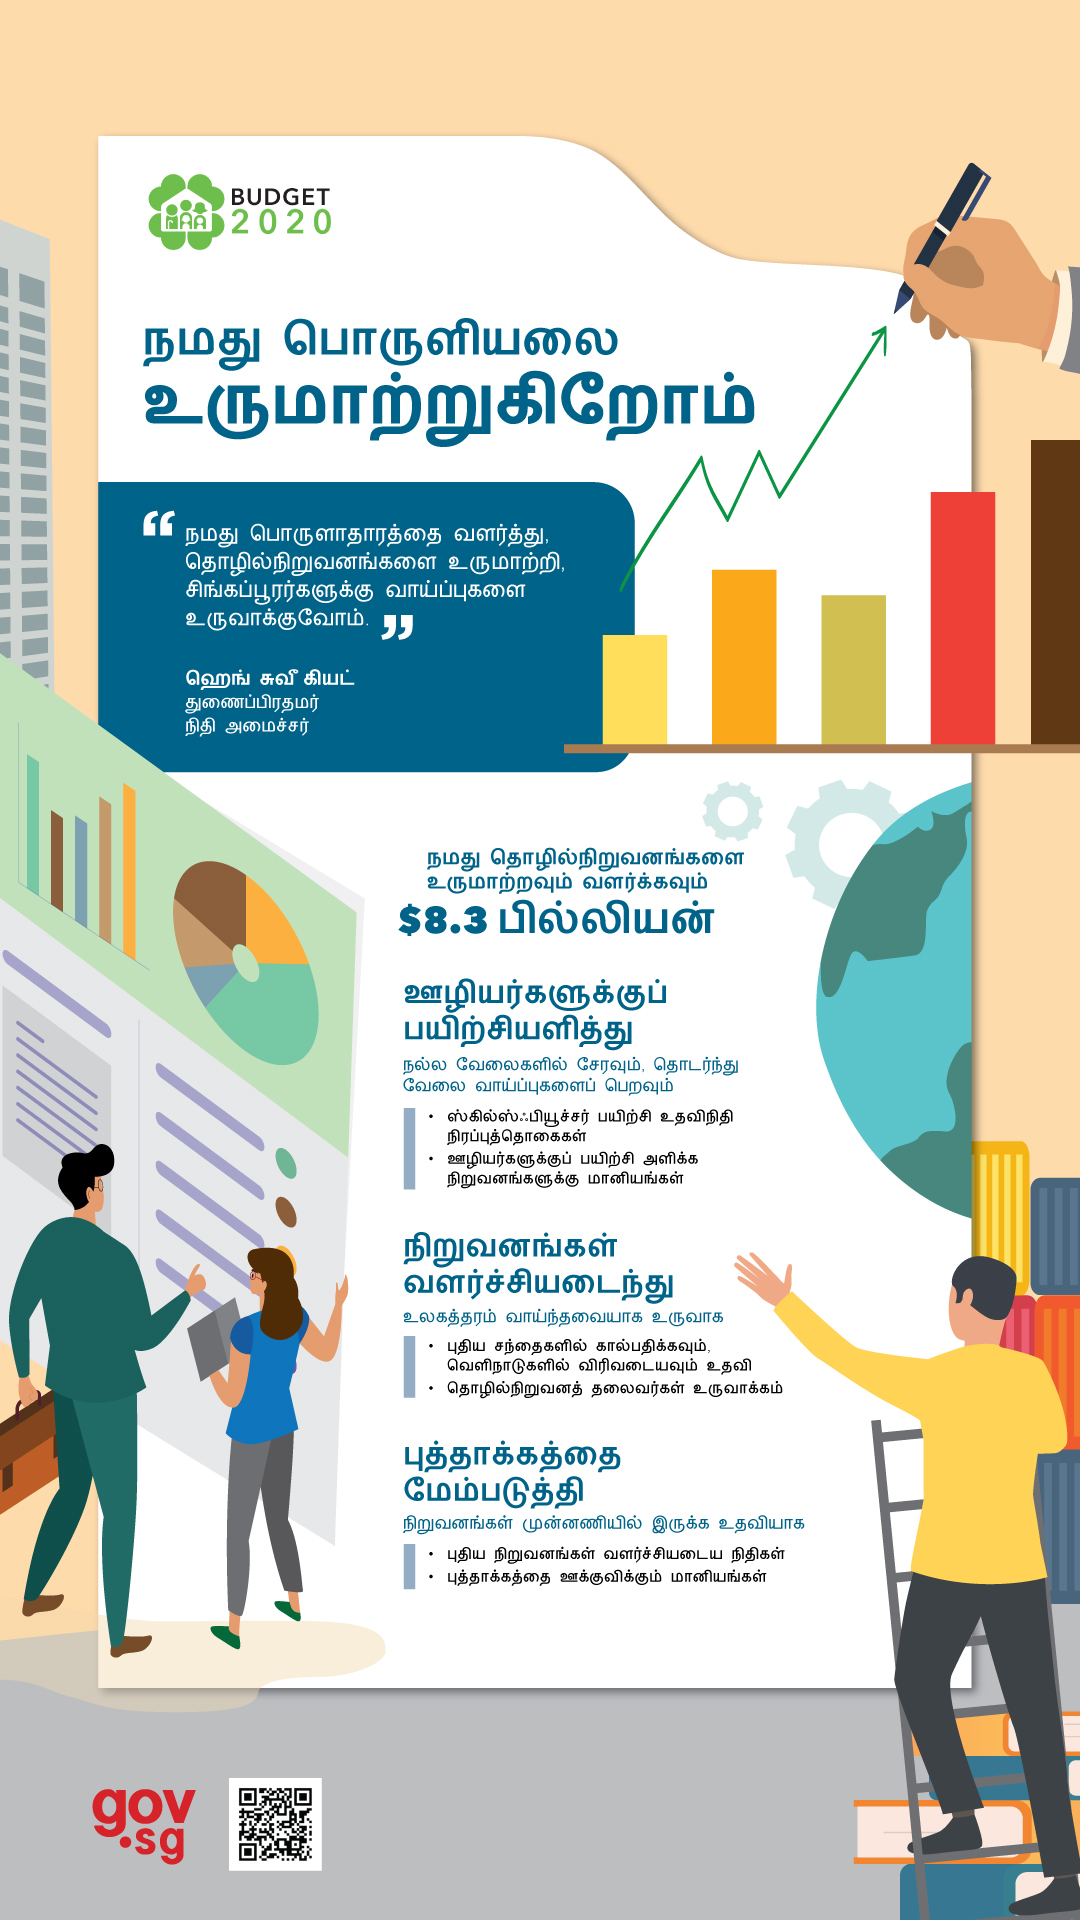 Tamil - Helping companies grow, transform and stay competitive